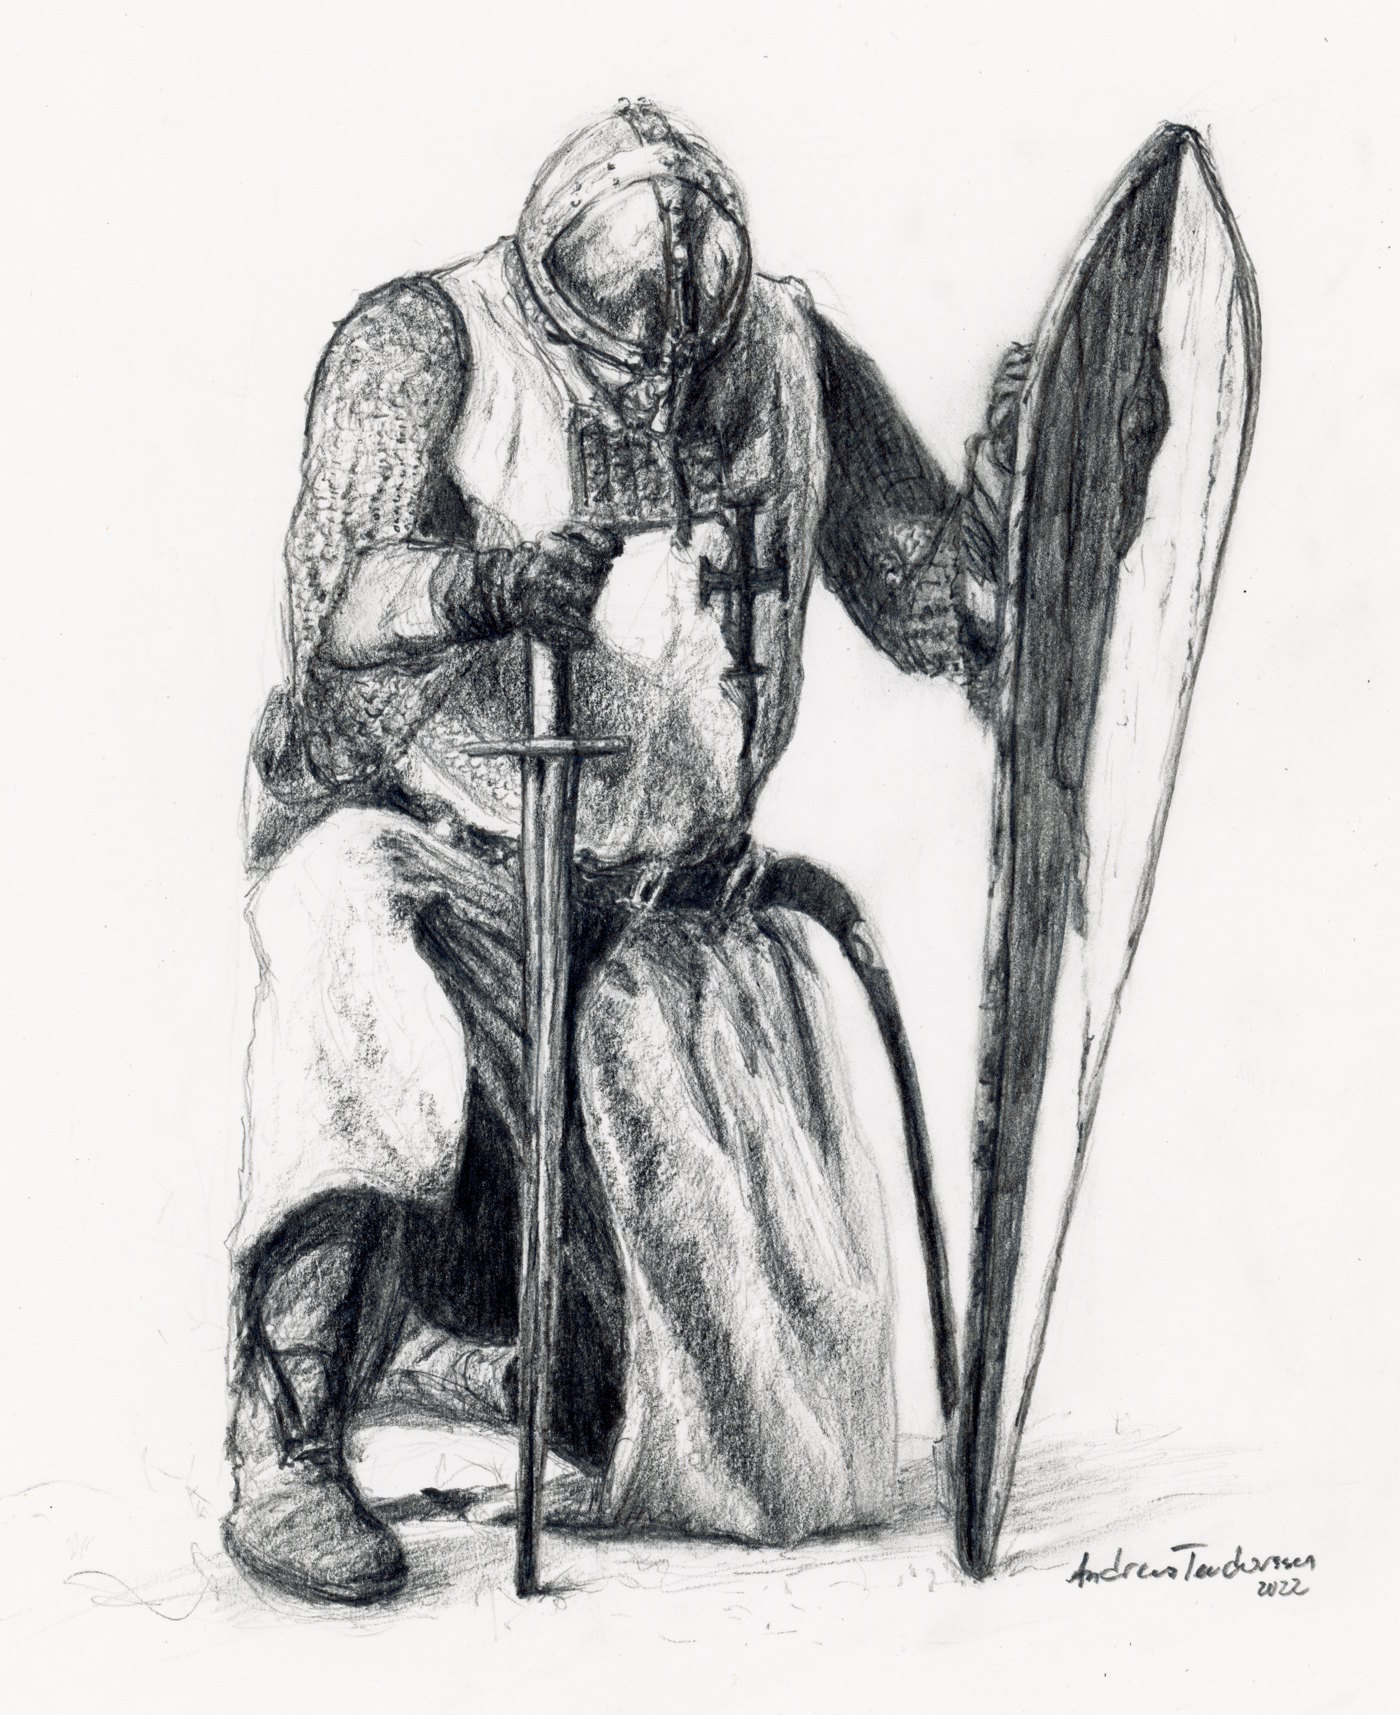 A pencil drawing of a kneeling knight. His right hand is resting on his sword and the left hand is holding a large shield